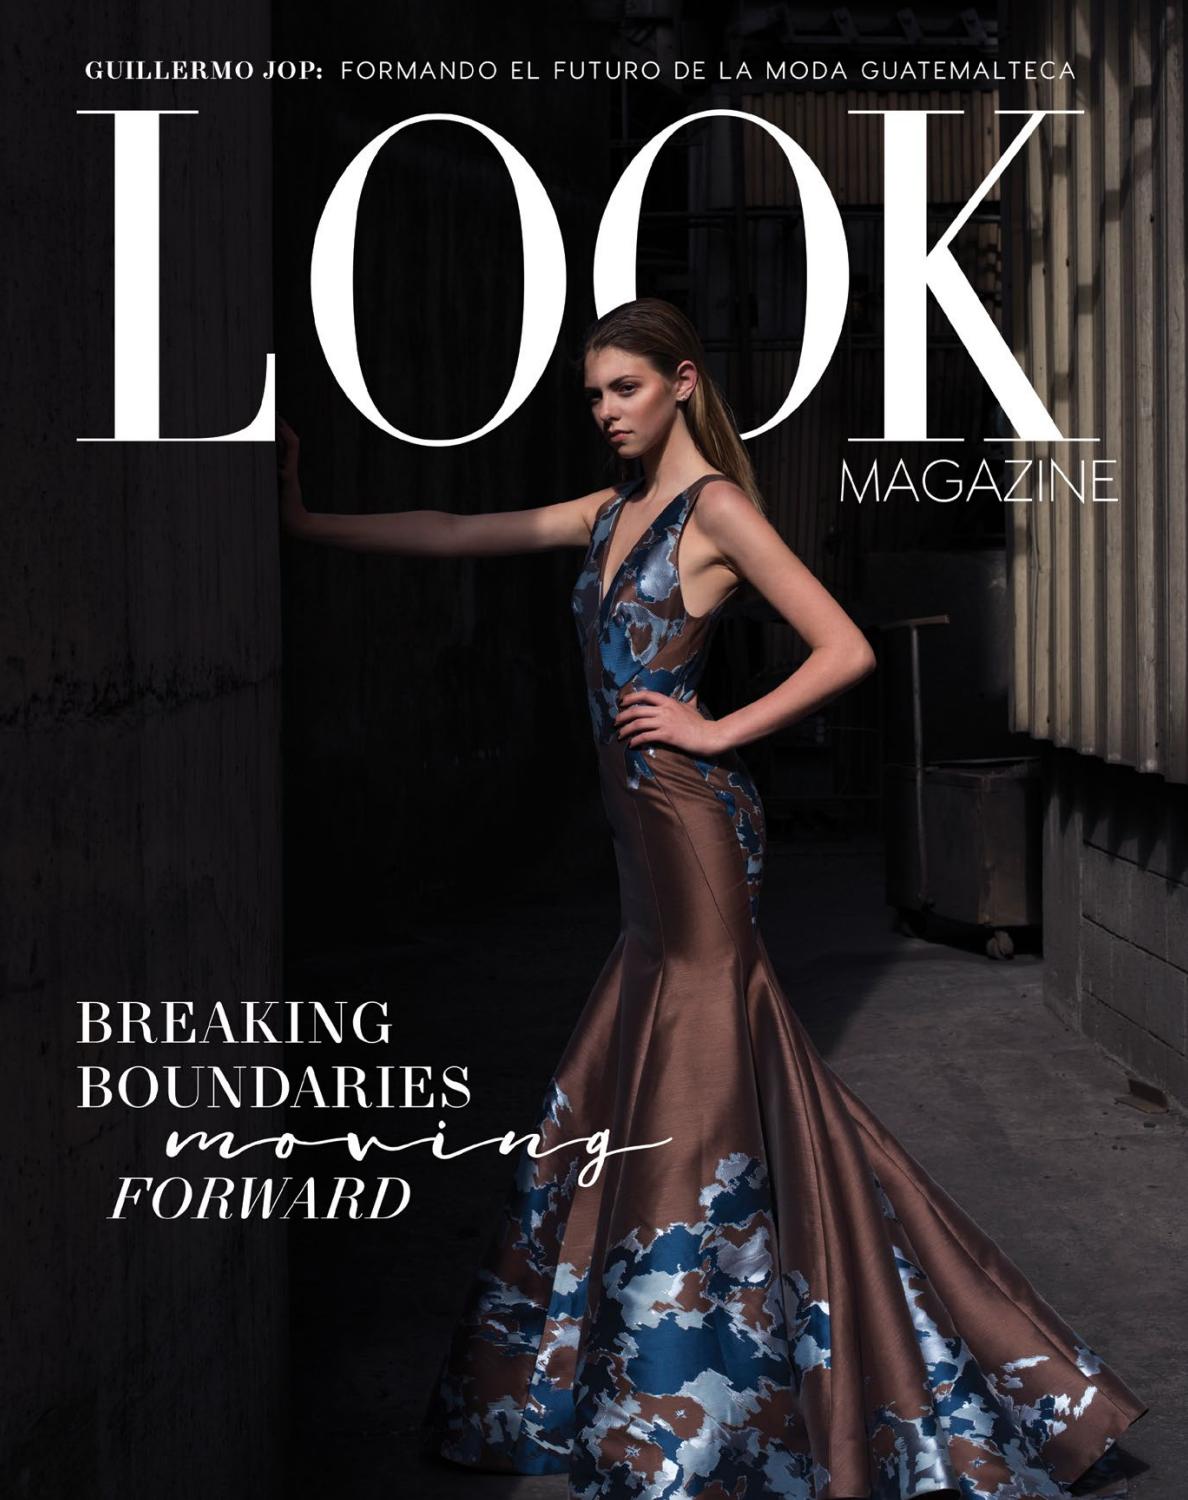 GUiSHEM in the cover and inside spread of Look Magazine, July 2016